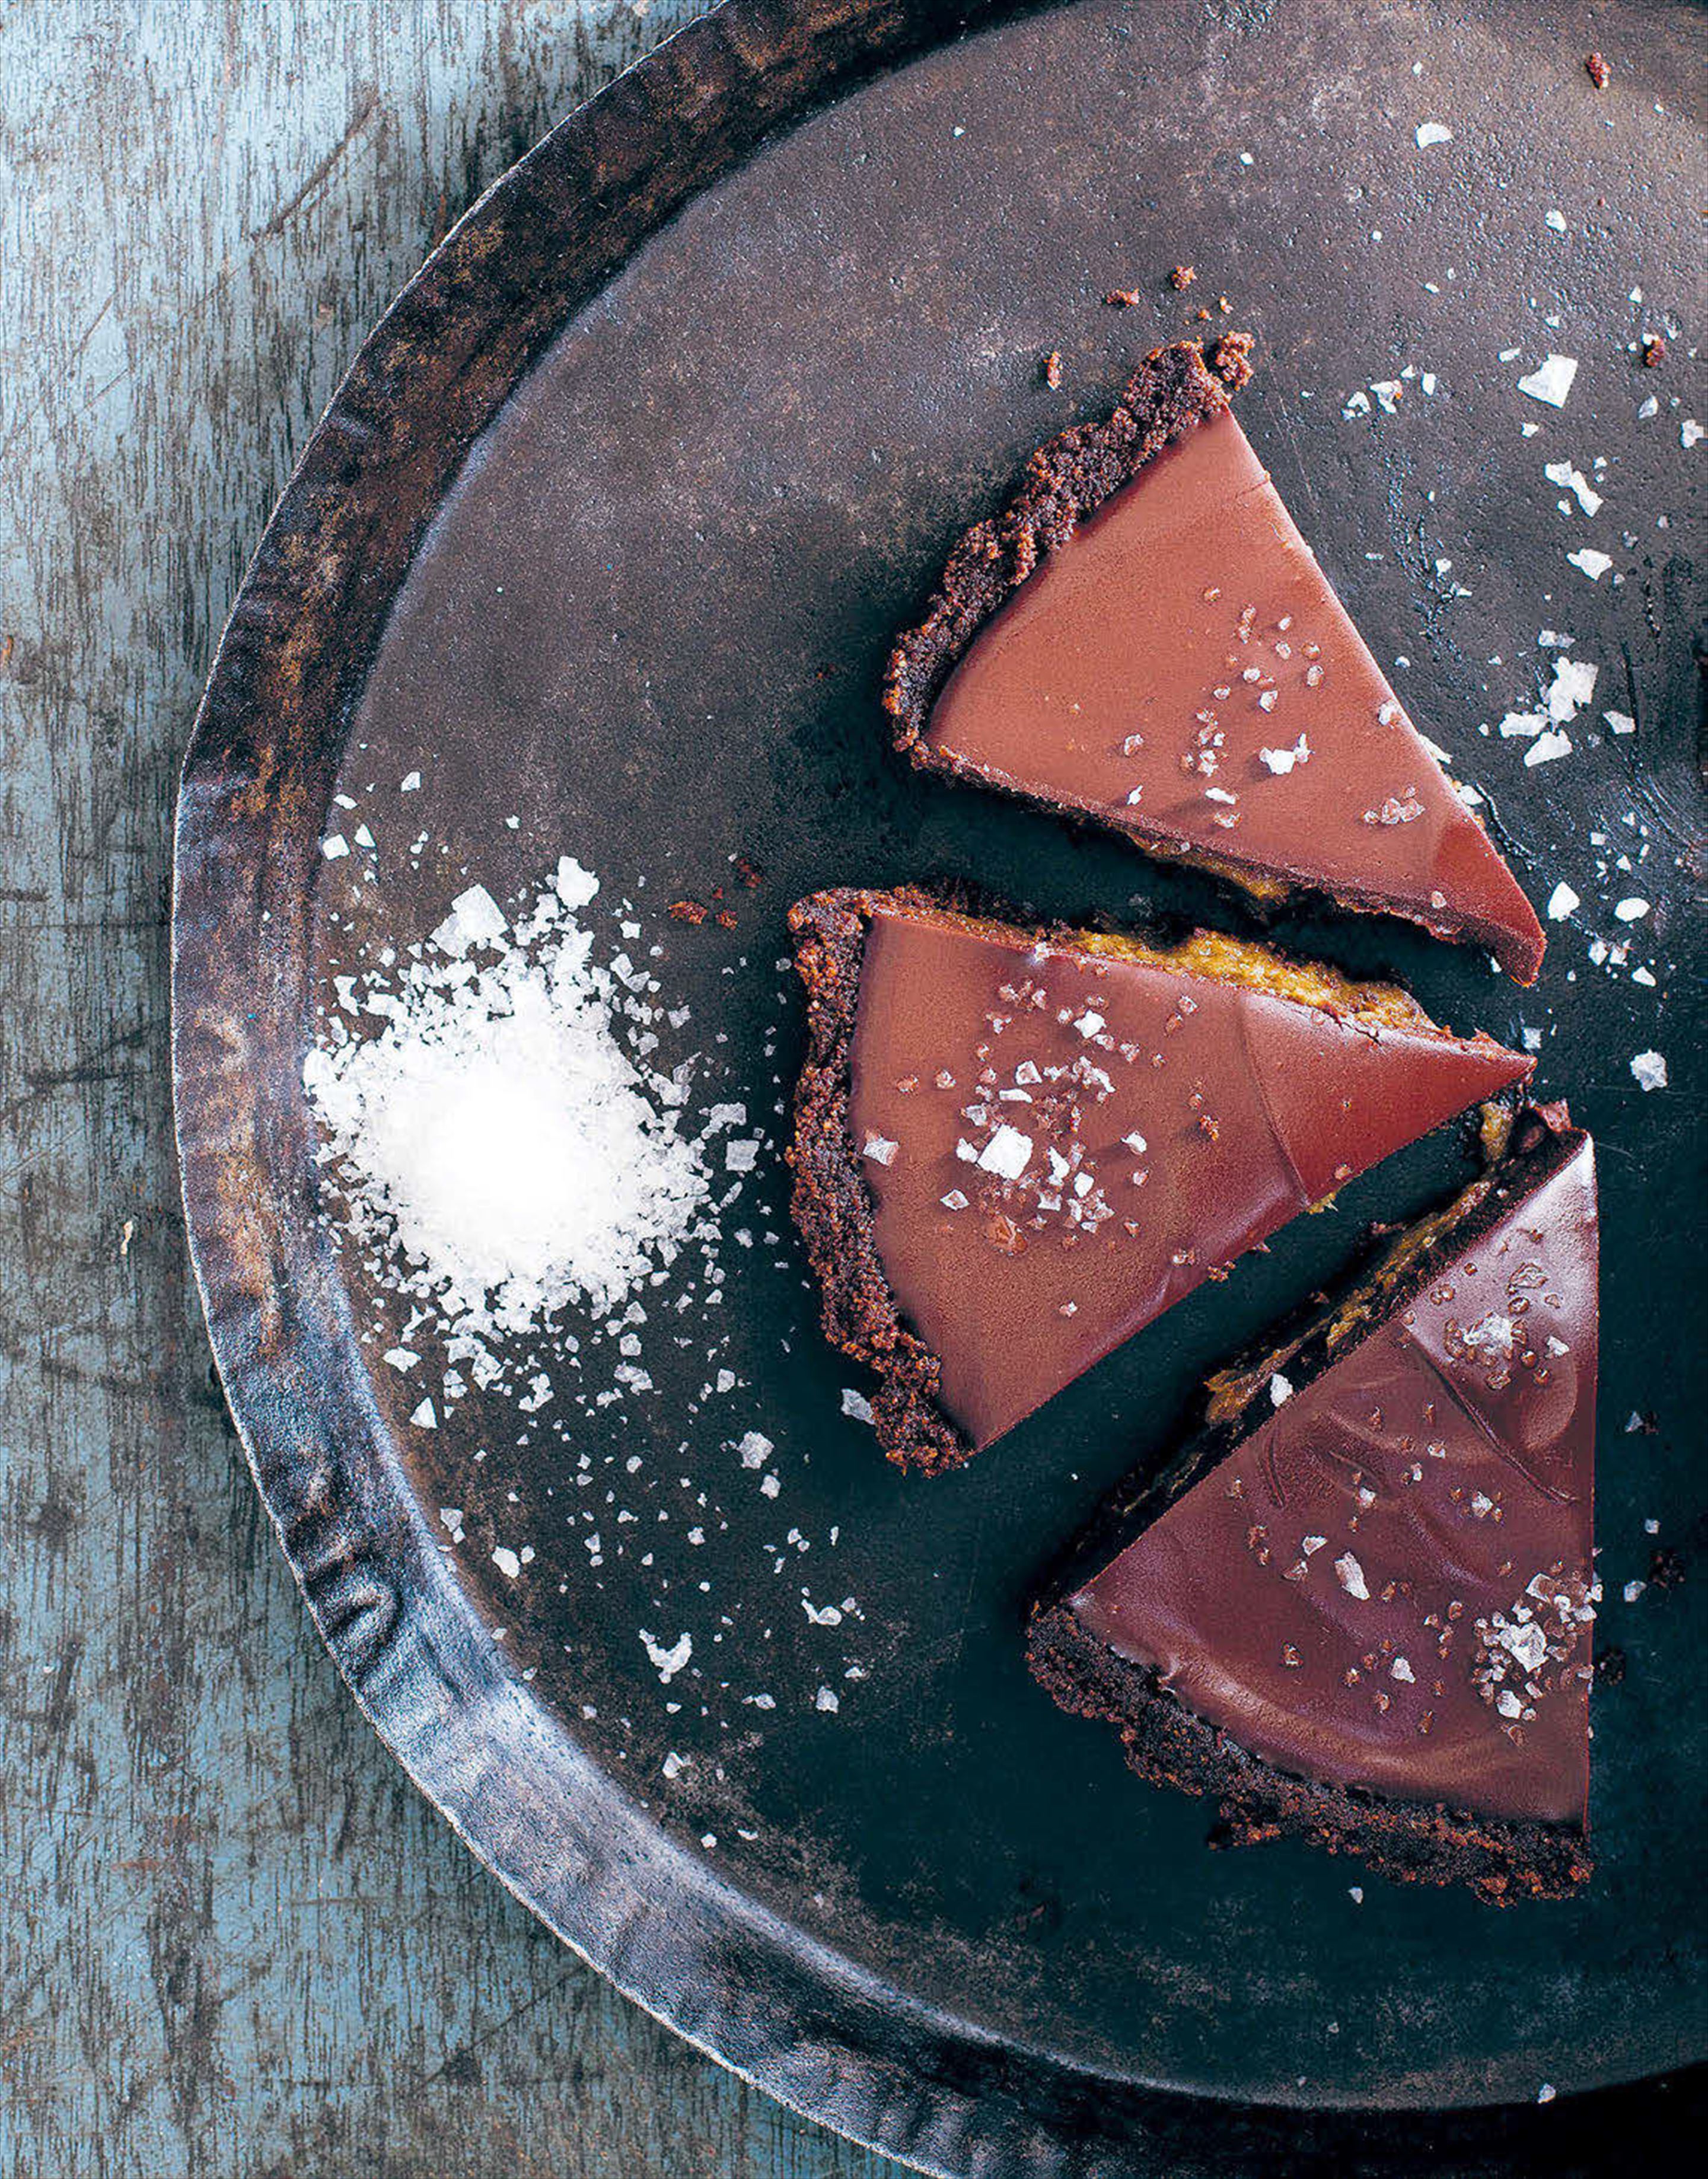 Salted chocolate and date pie